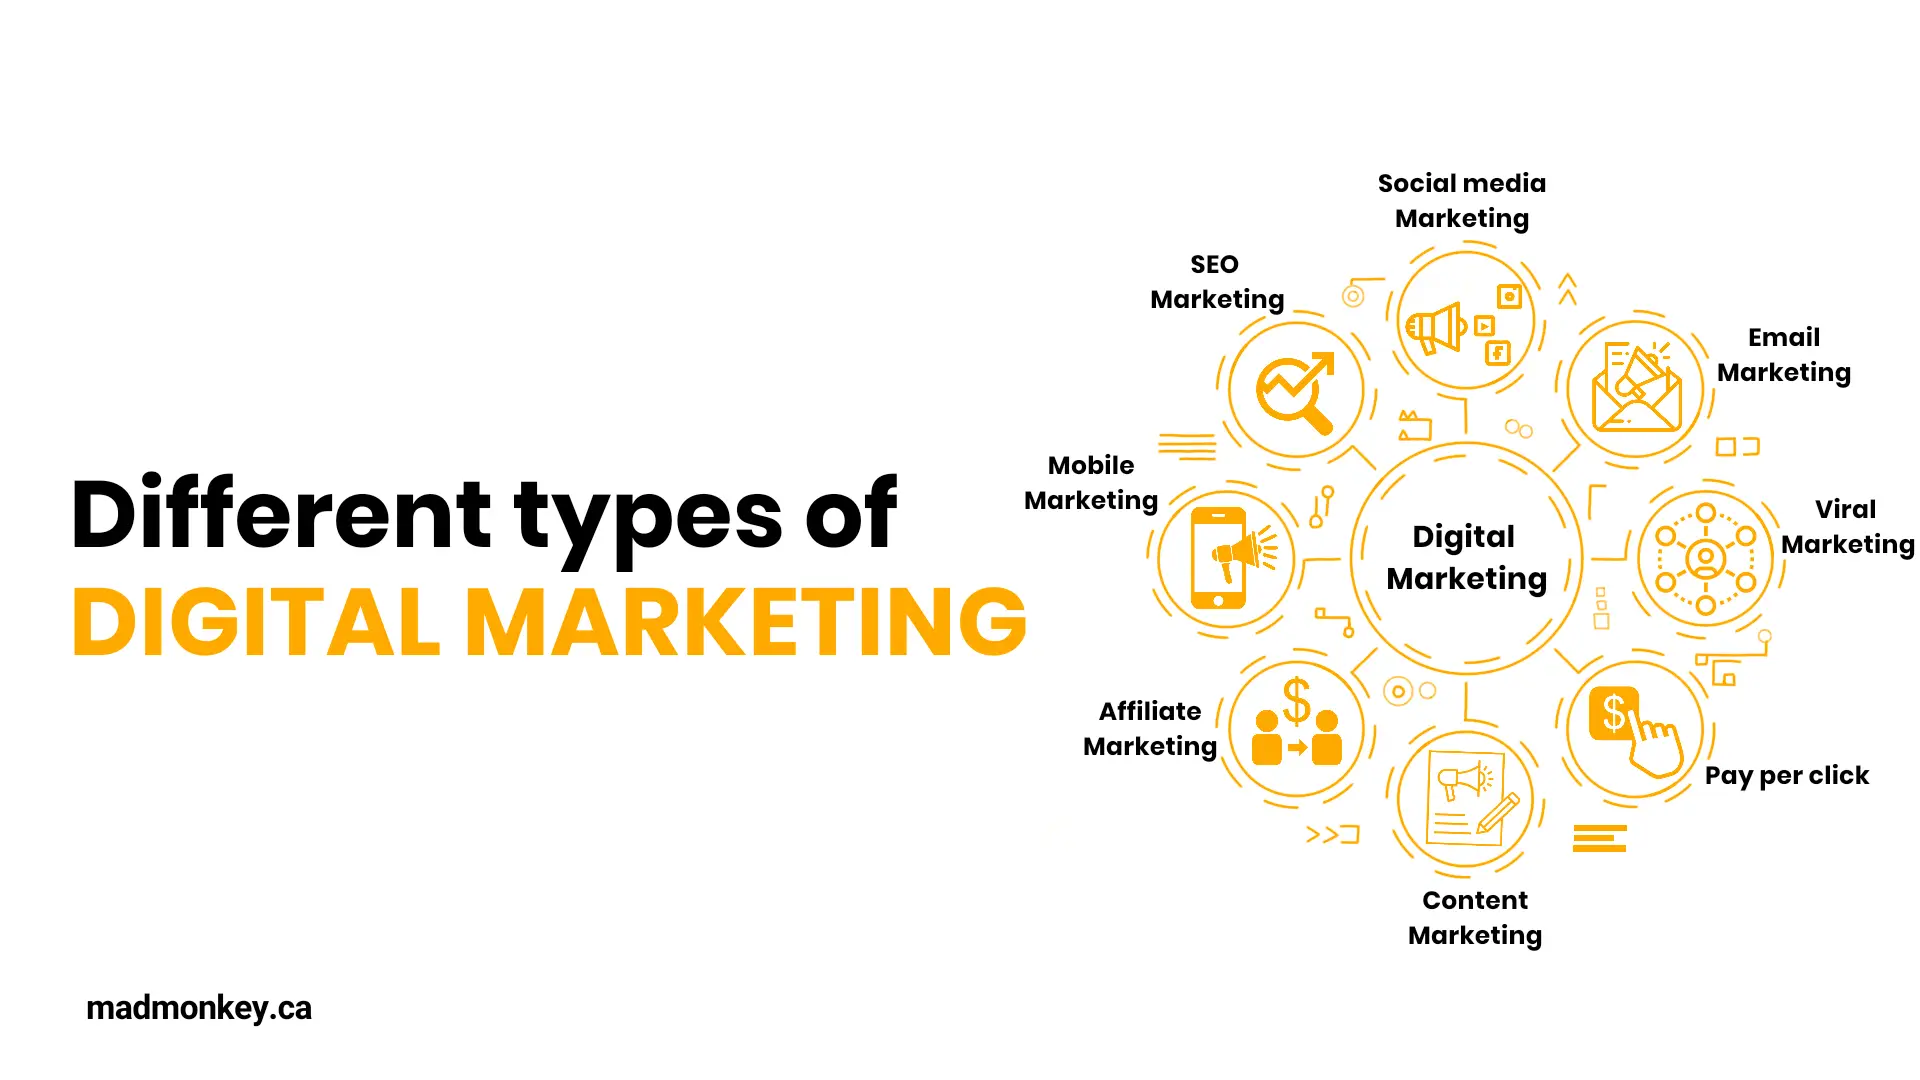 What Are The Different Types of Digital Marketing?